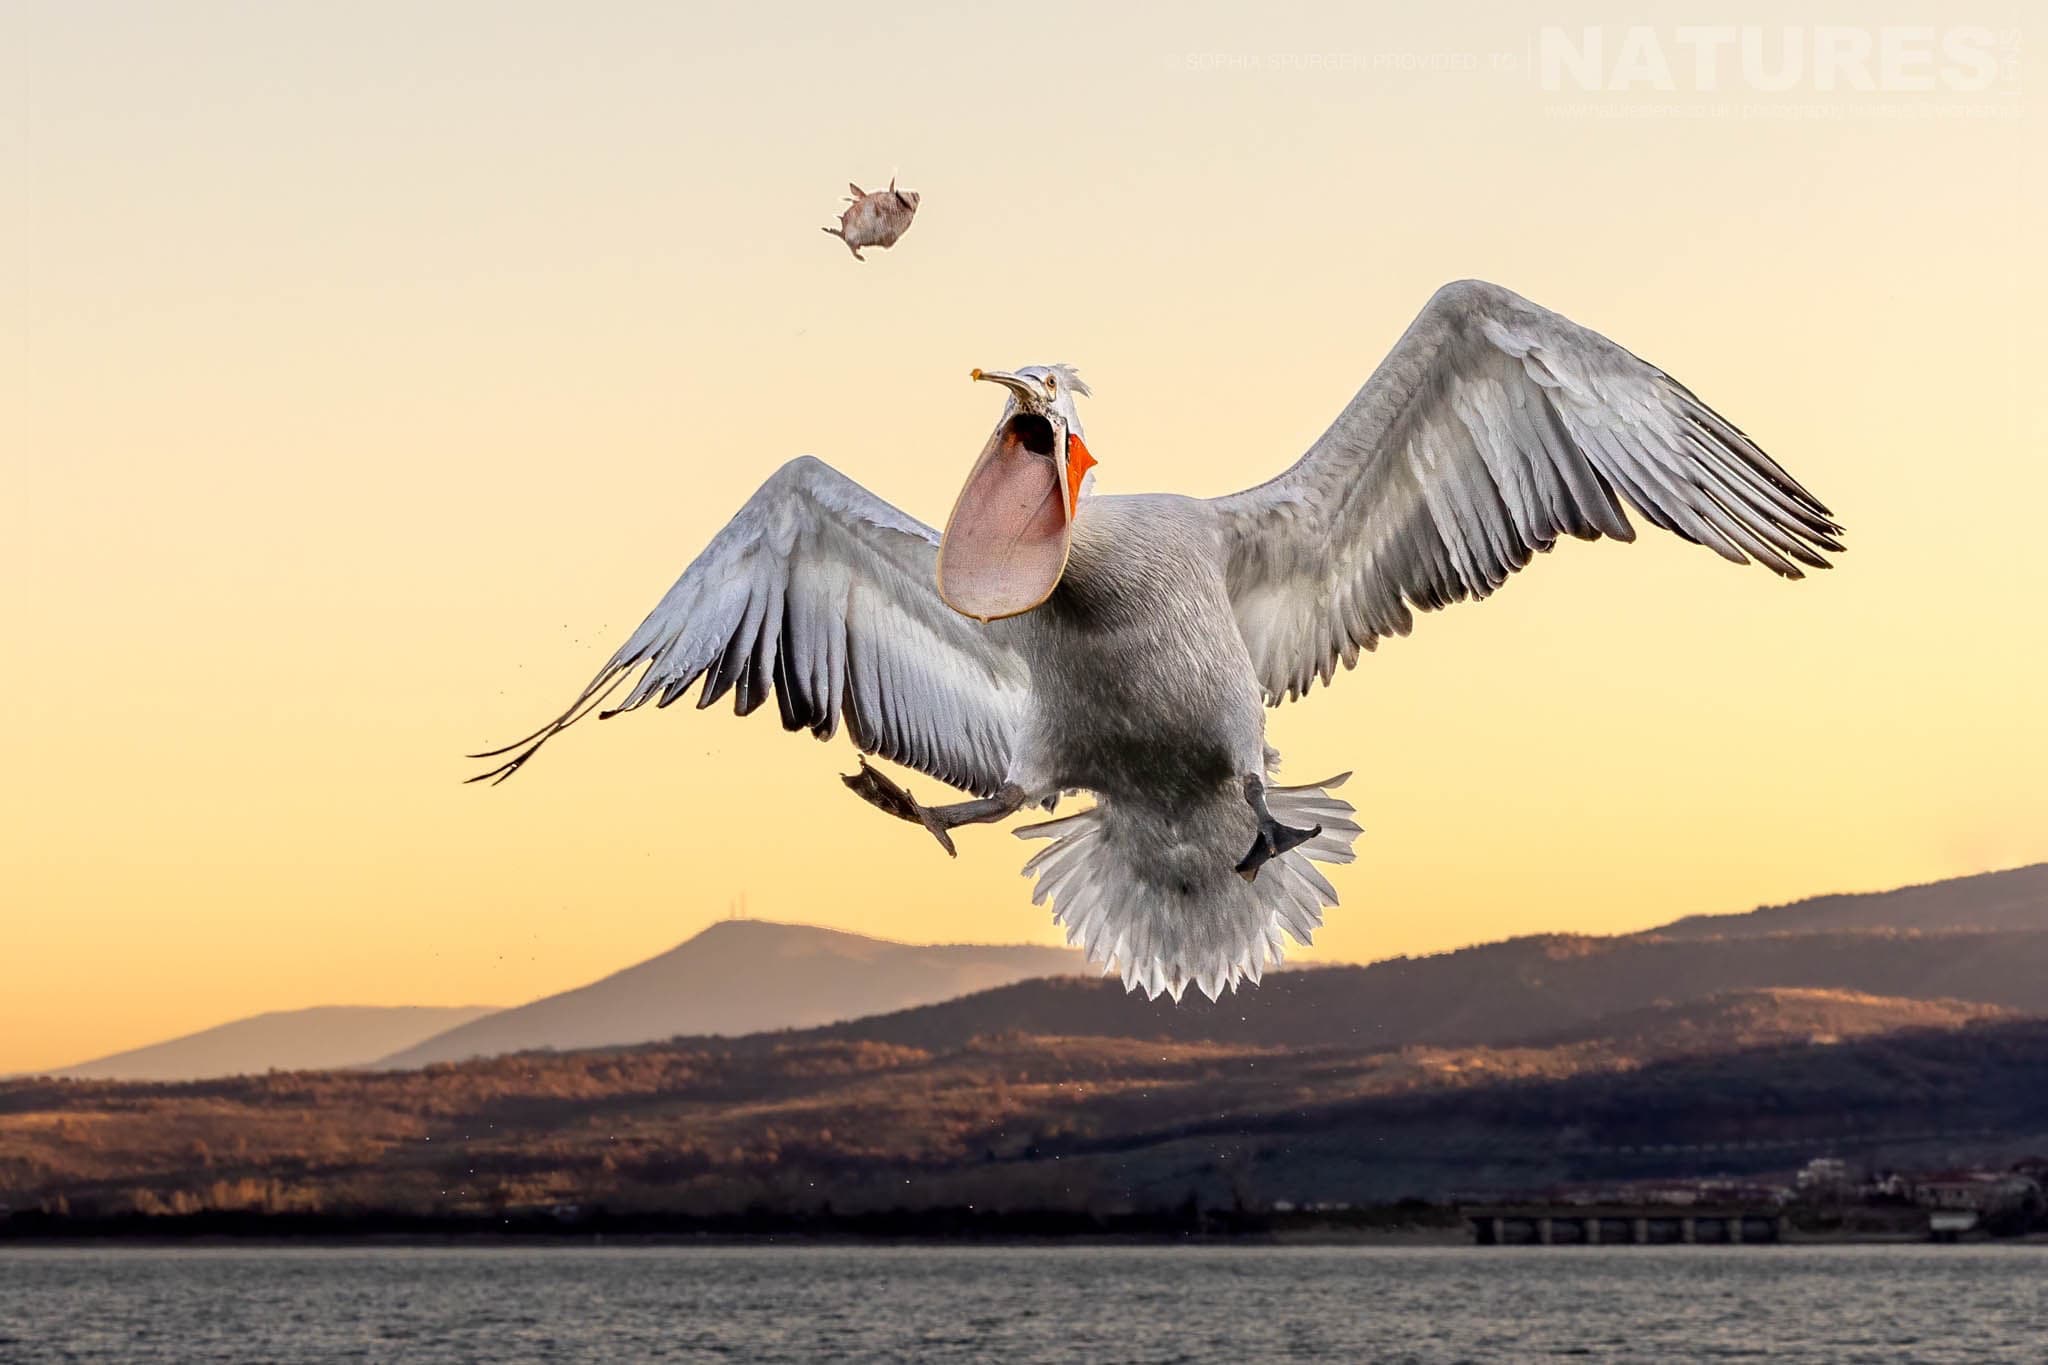 One Of The Dalmatian Pelicans Of Greece Opens Wide For A Thrown Fish Above The Waters Of Lake Kerkini